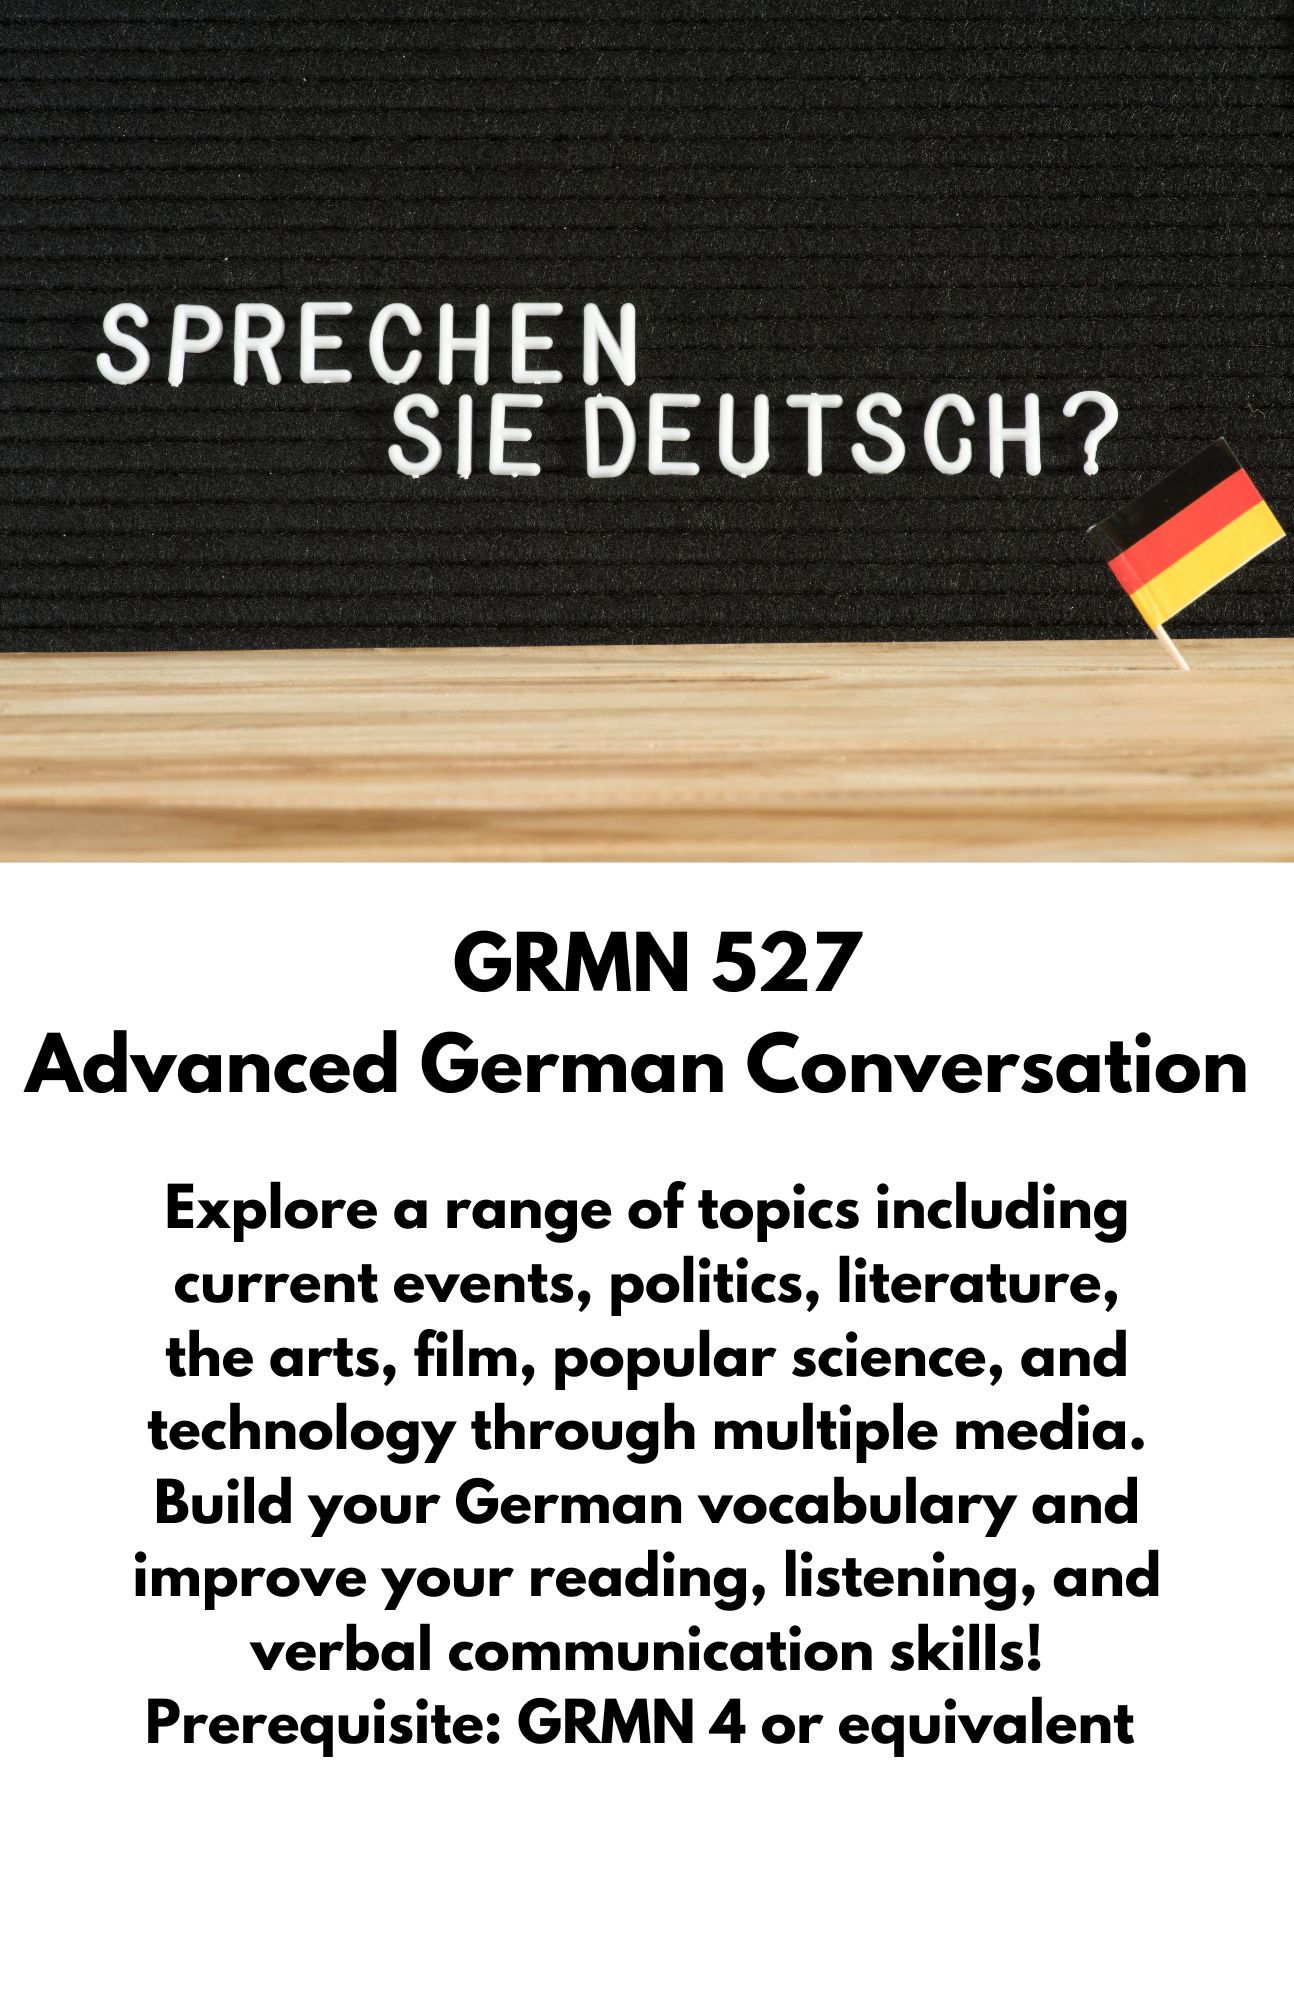 GRMN 527  Advanced German Conversation. Explore a range of topics including current events, politics, literature, the arts, film, popular science, and technology through multiple media. Build your German vocabulary and improve your reading, listening, and verbal communication skills! Prerequisite: GRMN 4 or equivalent